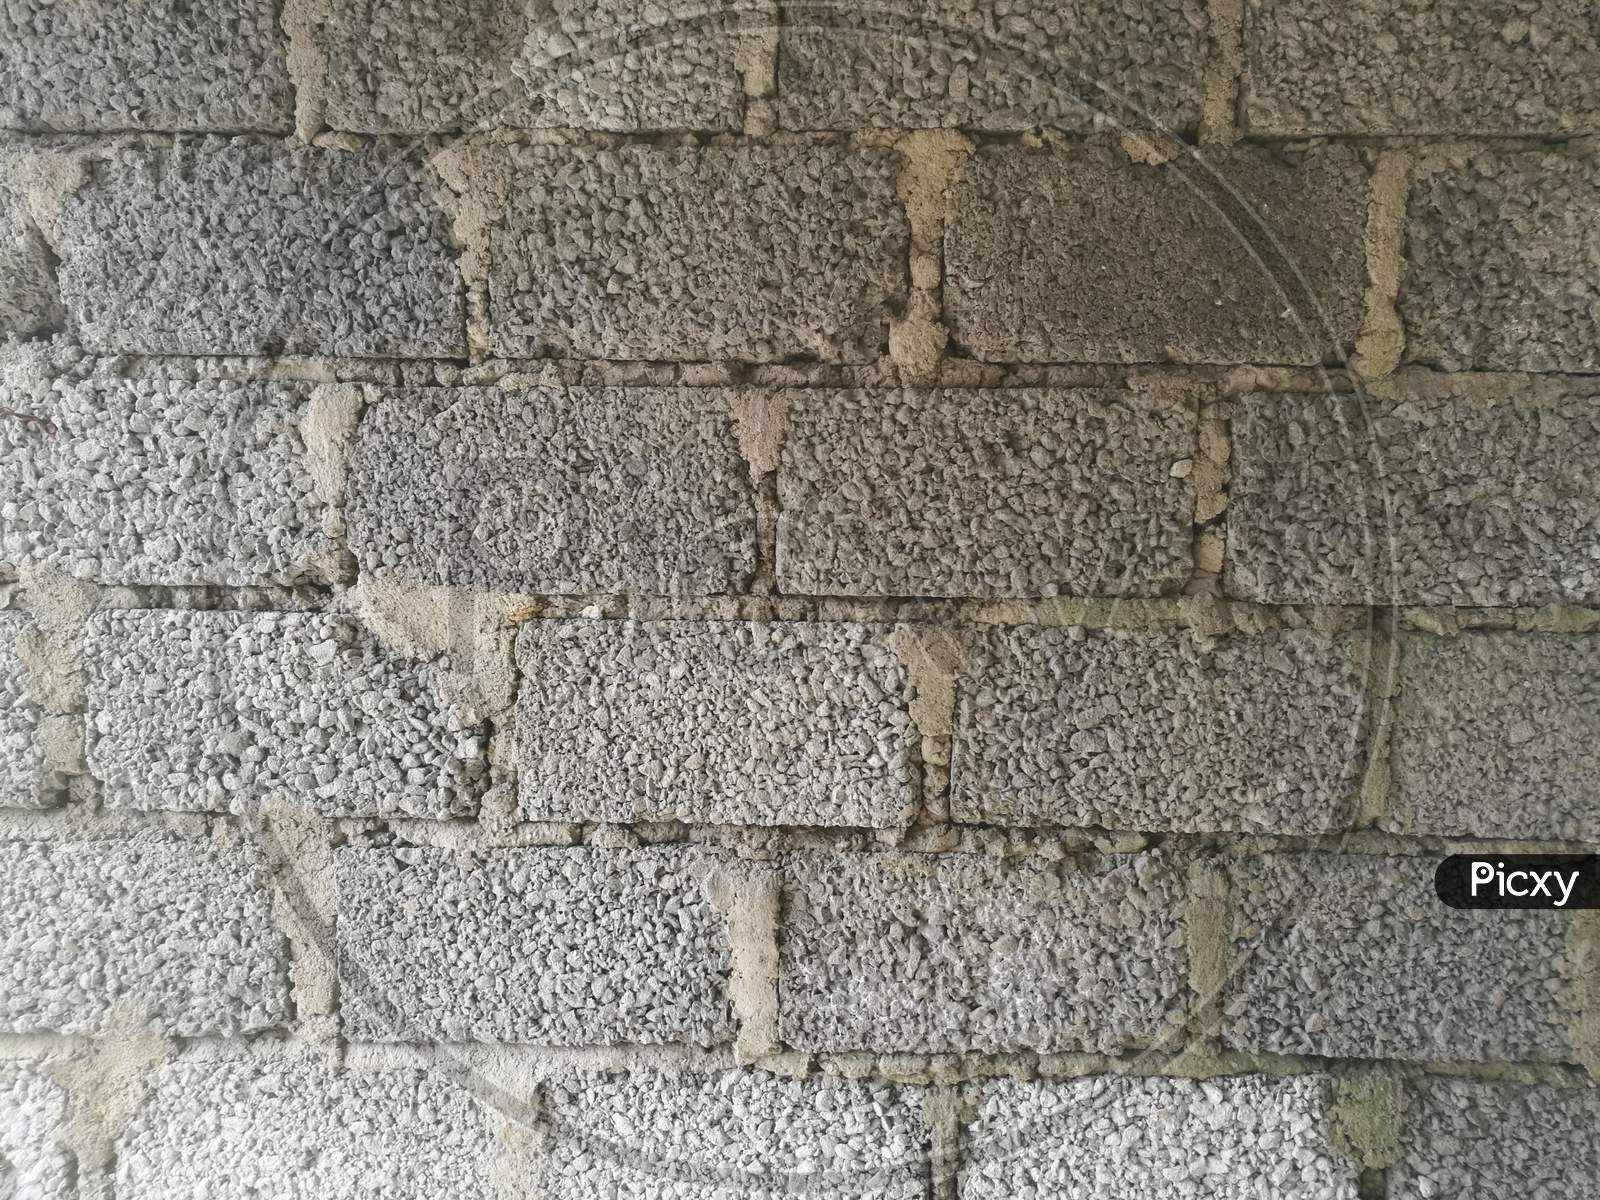 A Wall Made Of Cement Blocks And Concrete Like Texture.